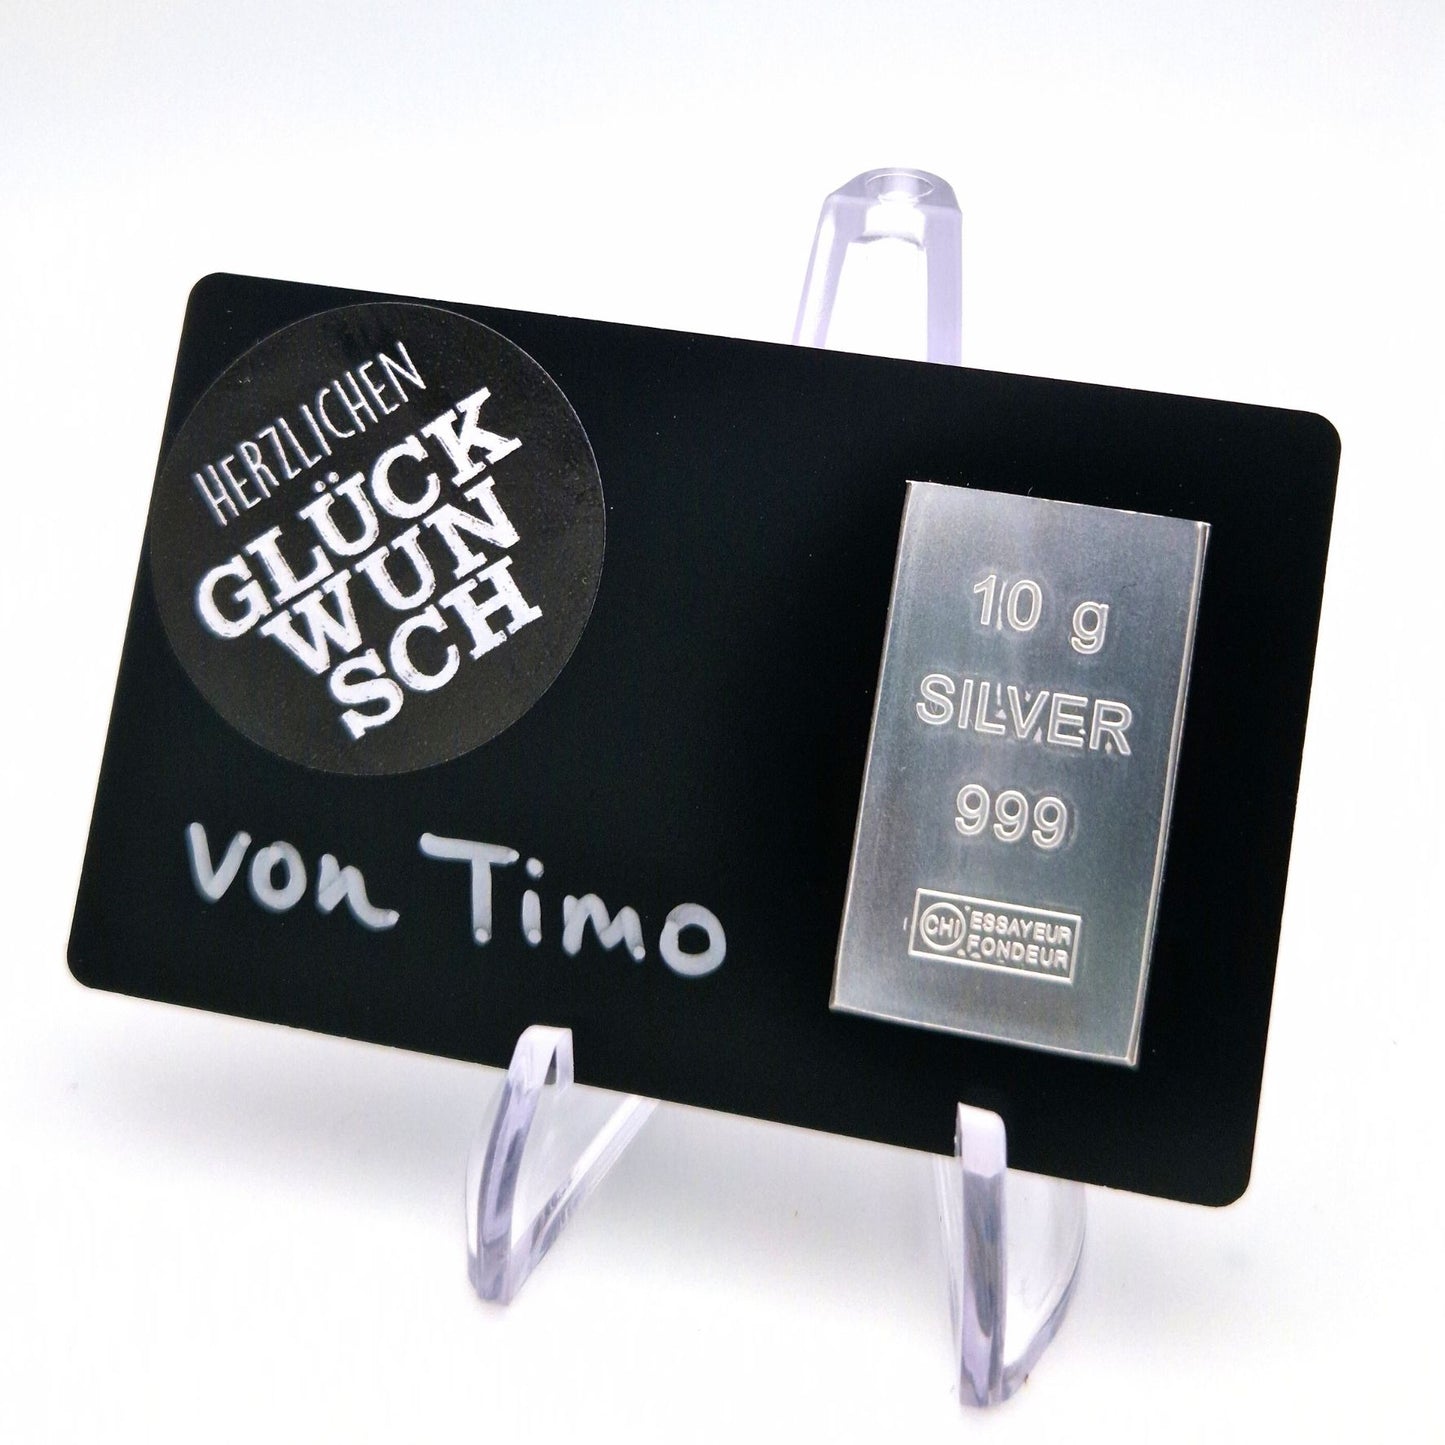 Silver gift card 10g